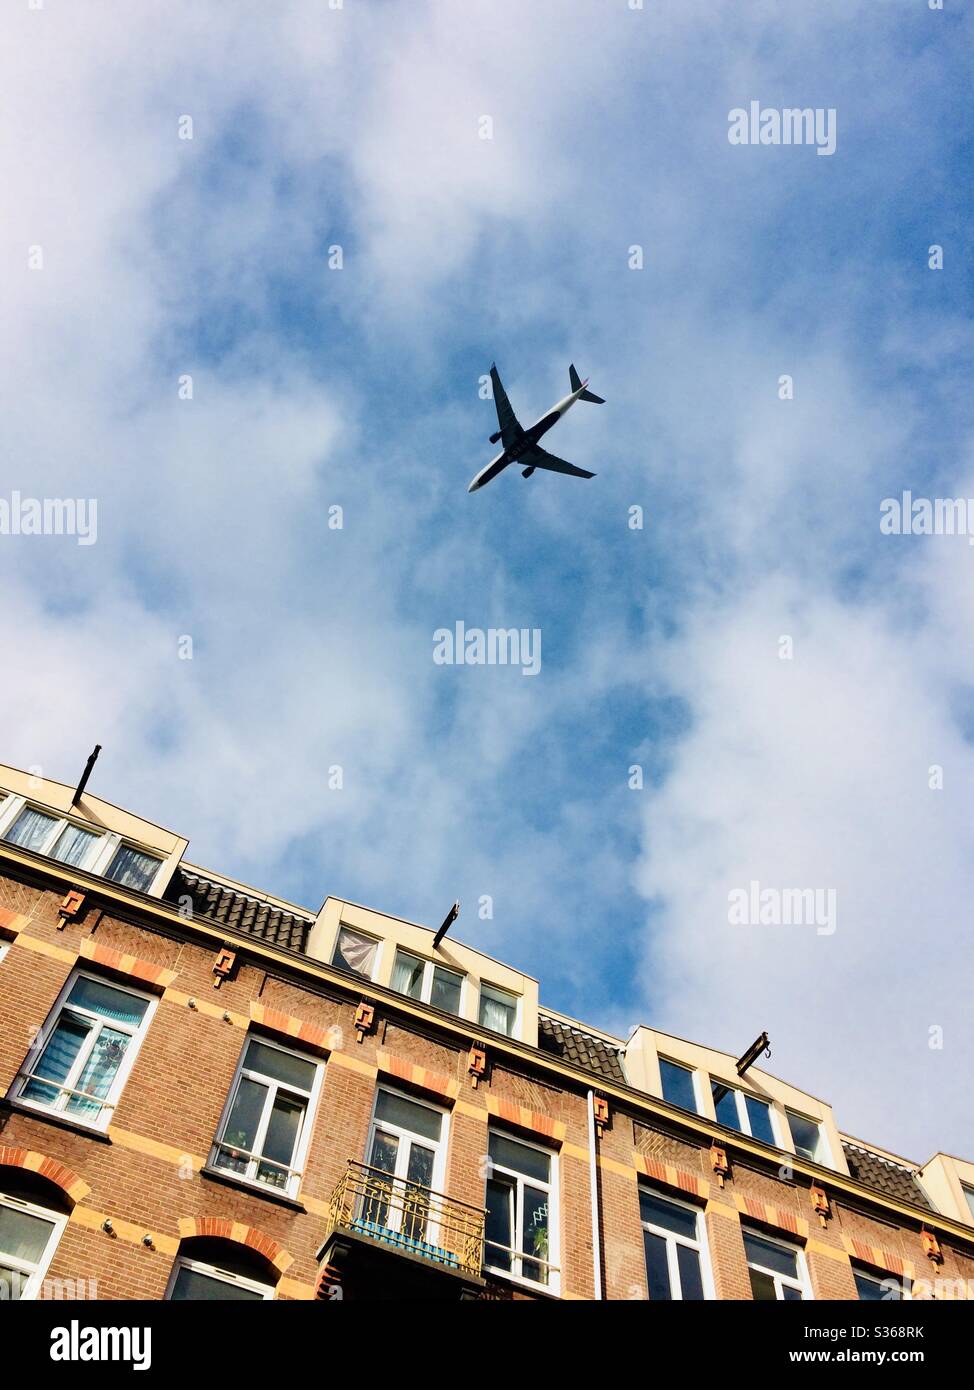 The plane is traveling. Amsterdam, The Netherlands. Stock Photo